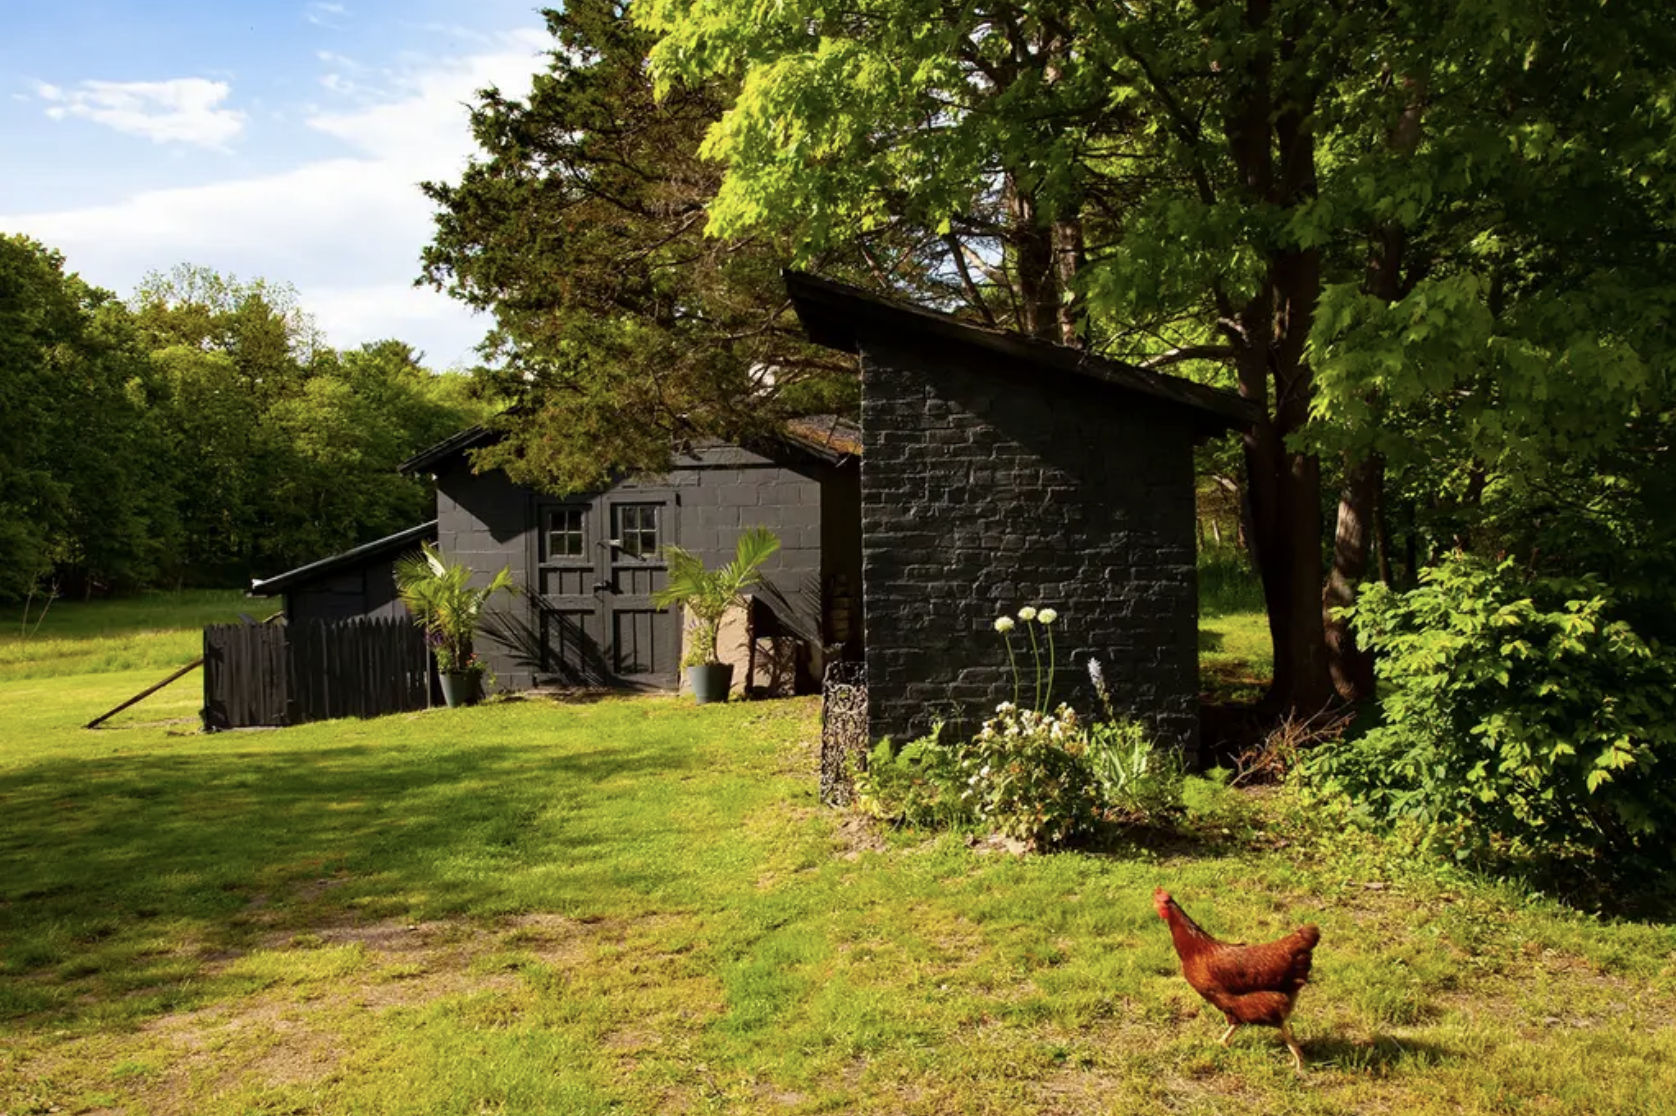 Glasco-ChickenCoop-Saugerties-NY.png